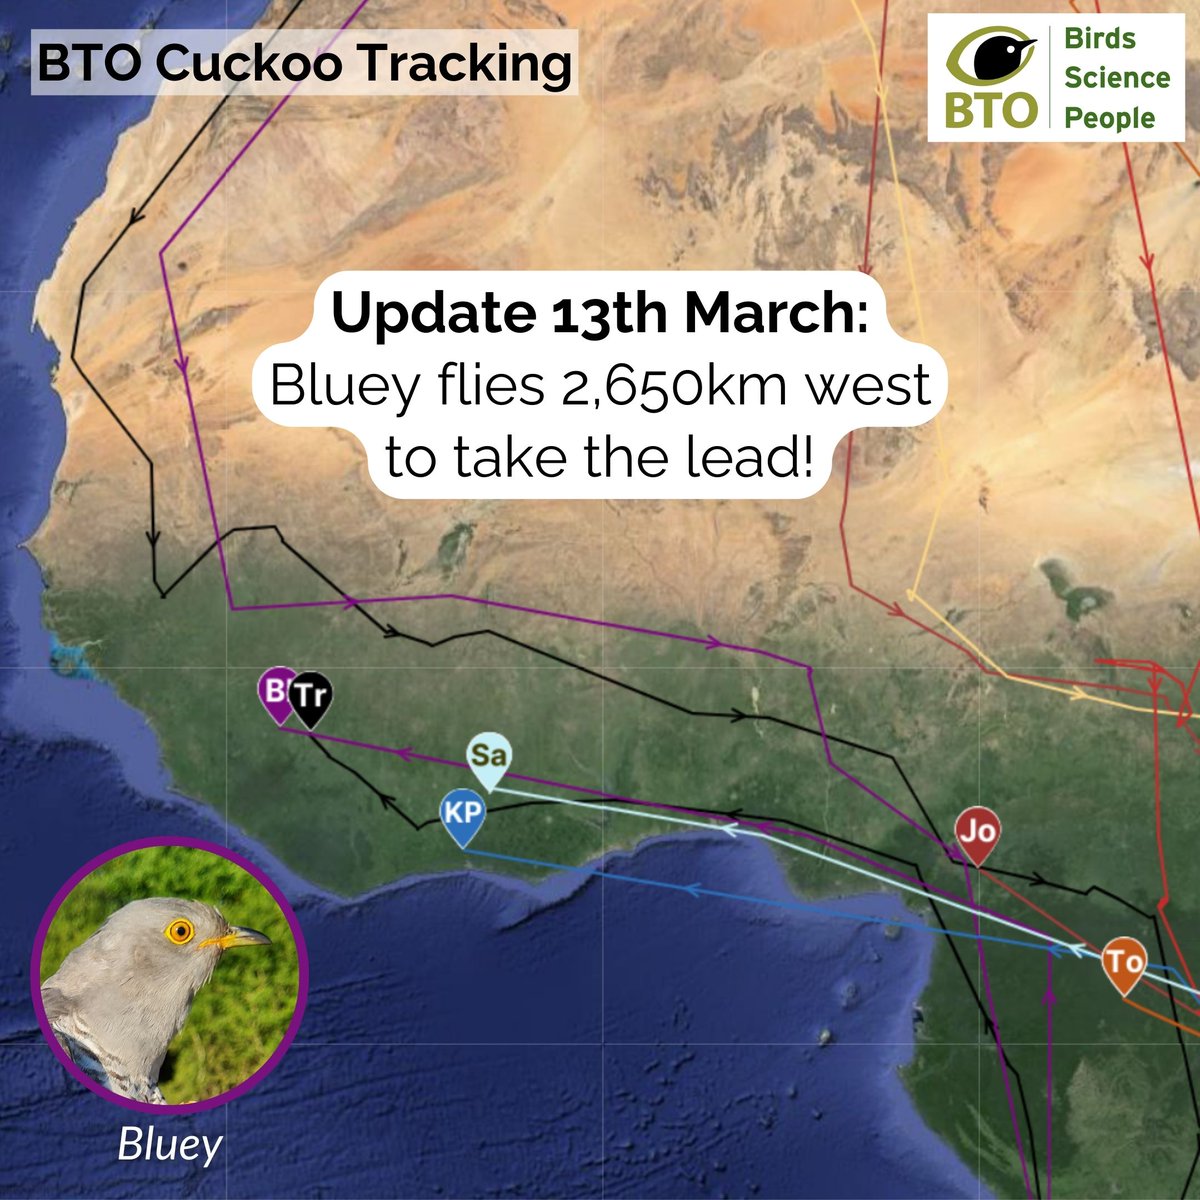 Bluey takes the lead! He's flown a massive 2,650km from Nigeria to join Cuckoo Trent in Guinea. How long will he stay in West Africa? Joe is hot on their heels, on his way to important stopover areas before crossing the Sahara. Follow their progress at bto.org/cuckoos